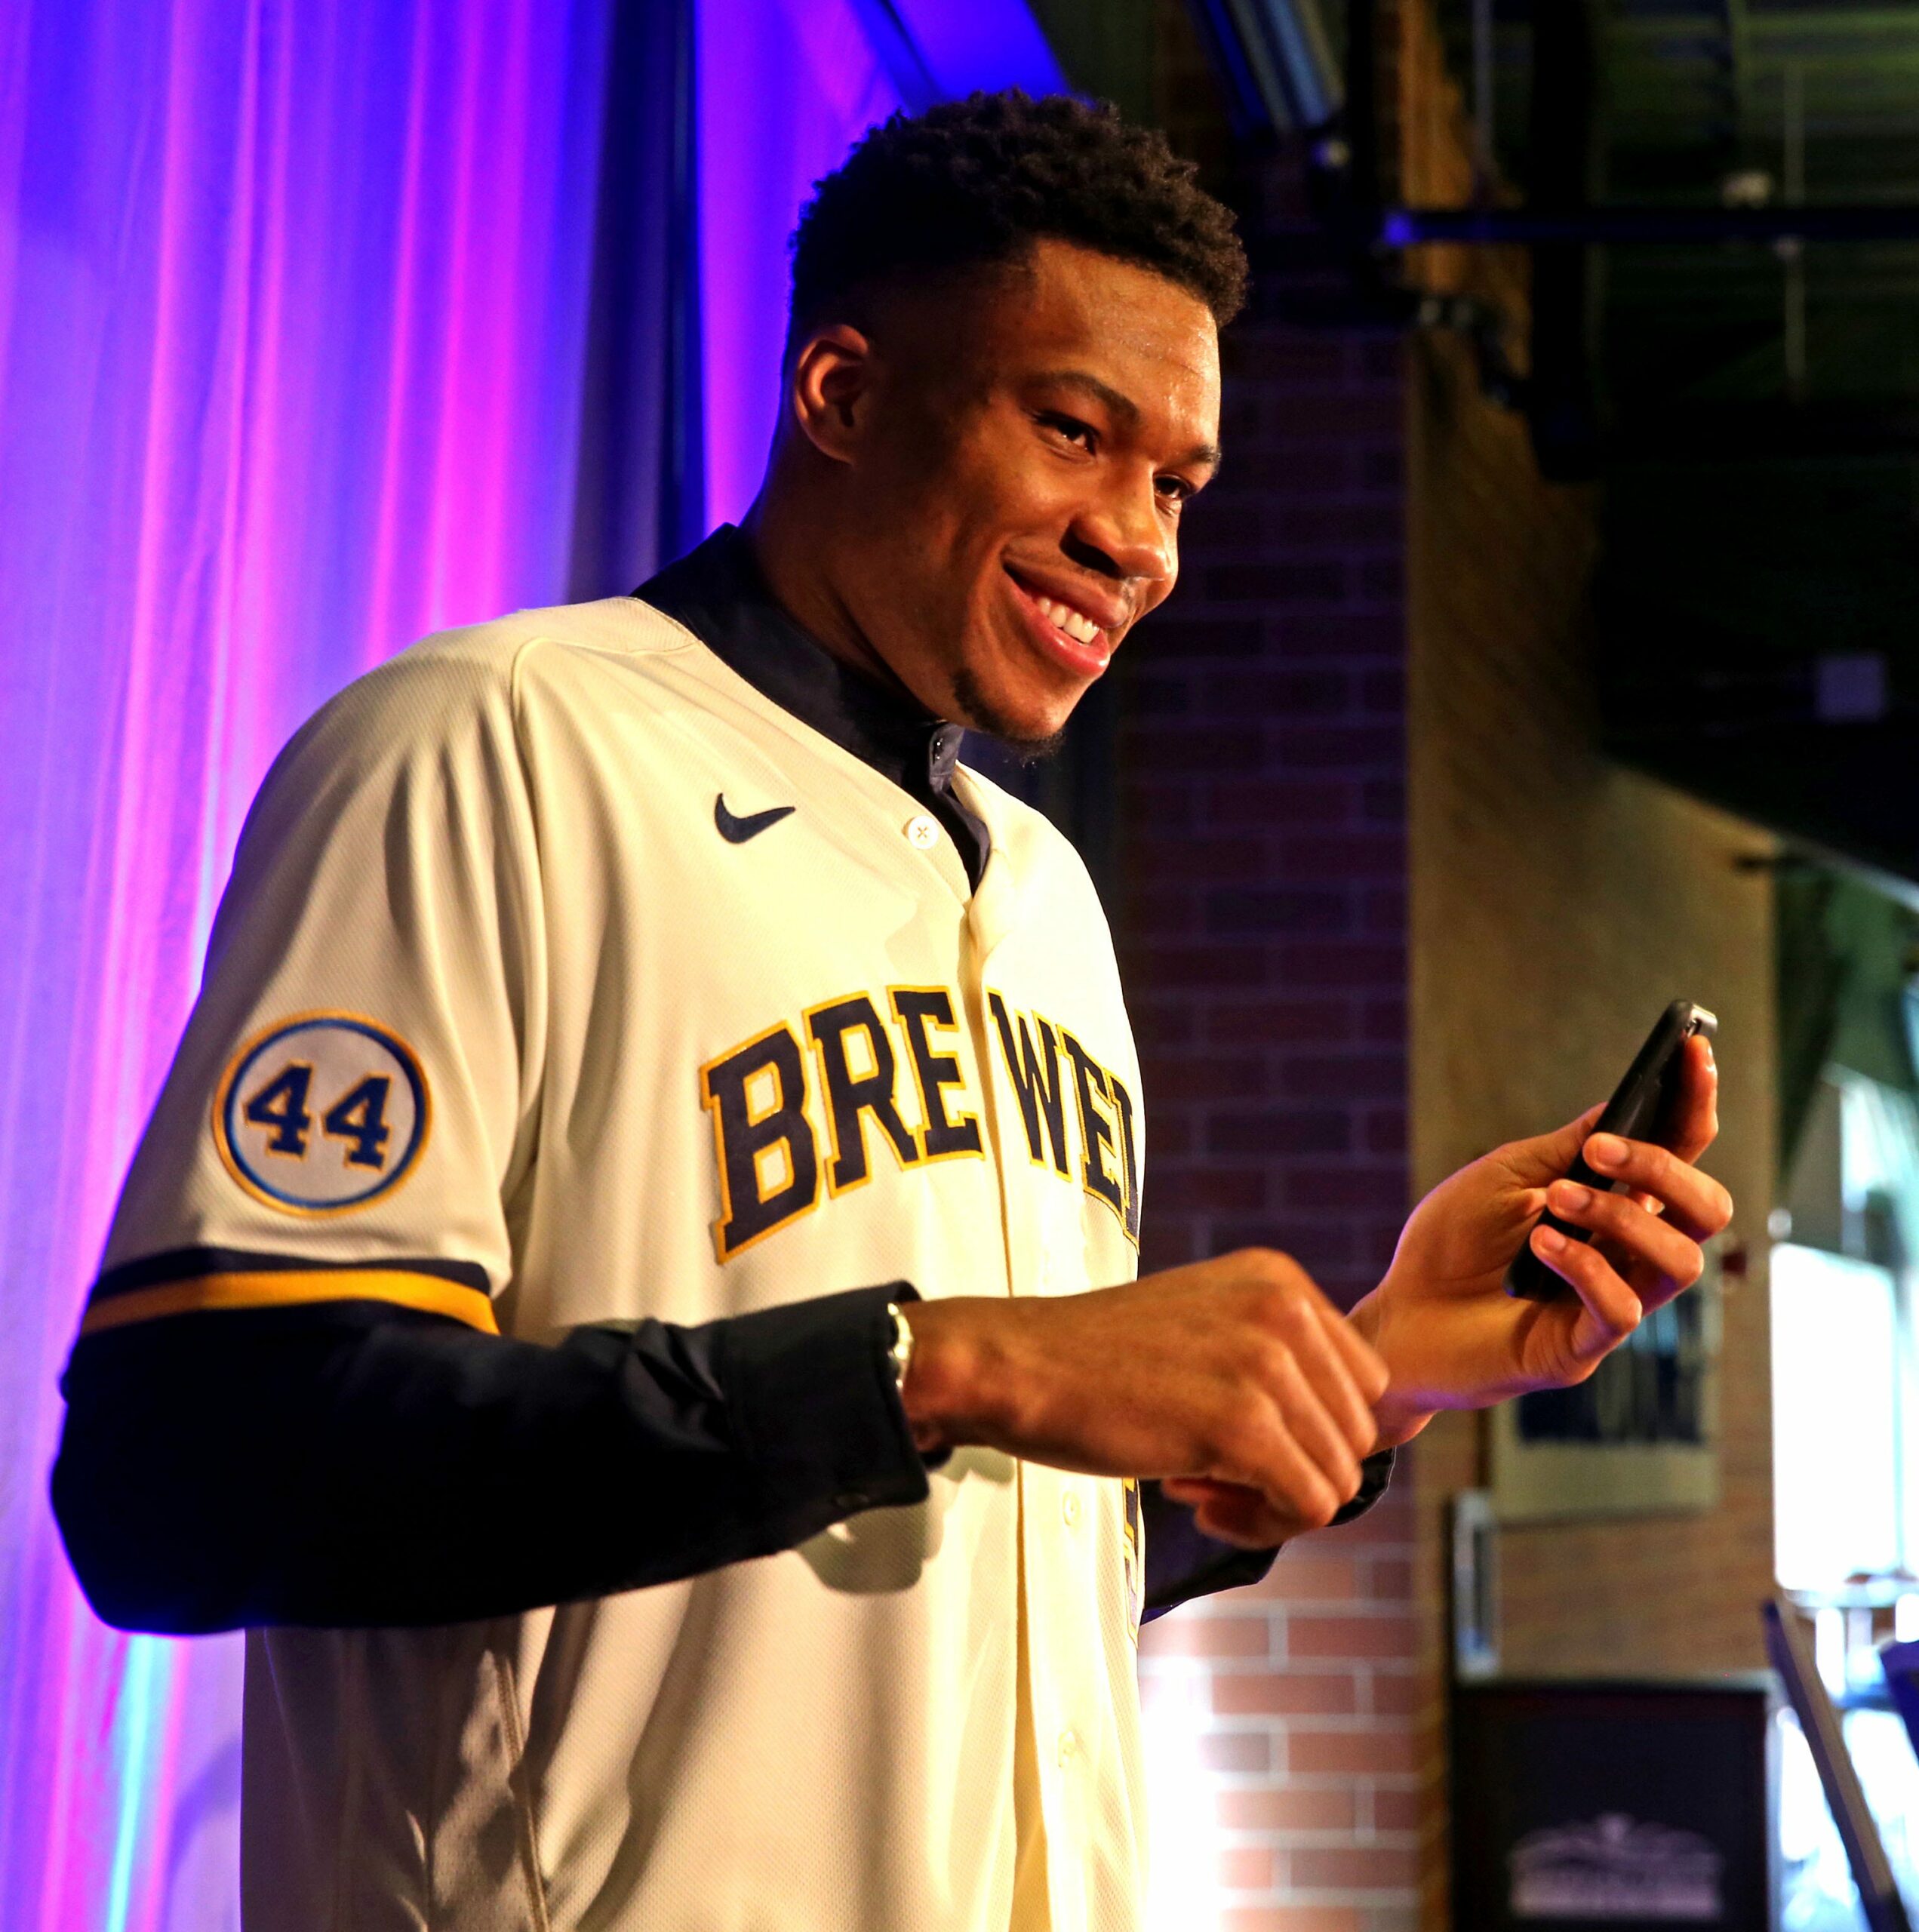 The Powder Brew Crew: Milwaukee Brewers Unveil City Connect